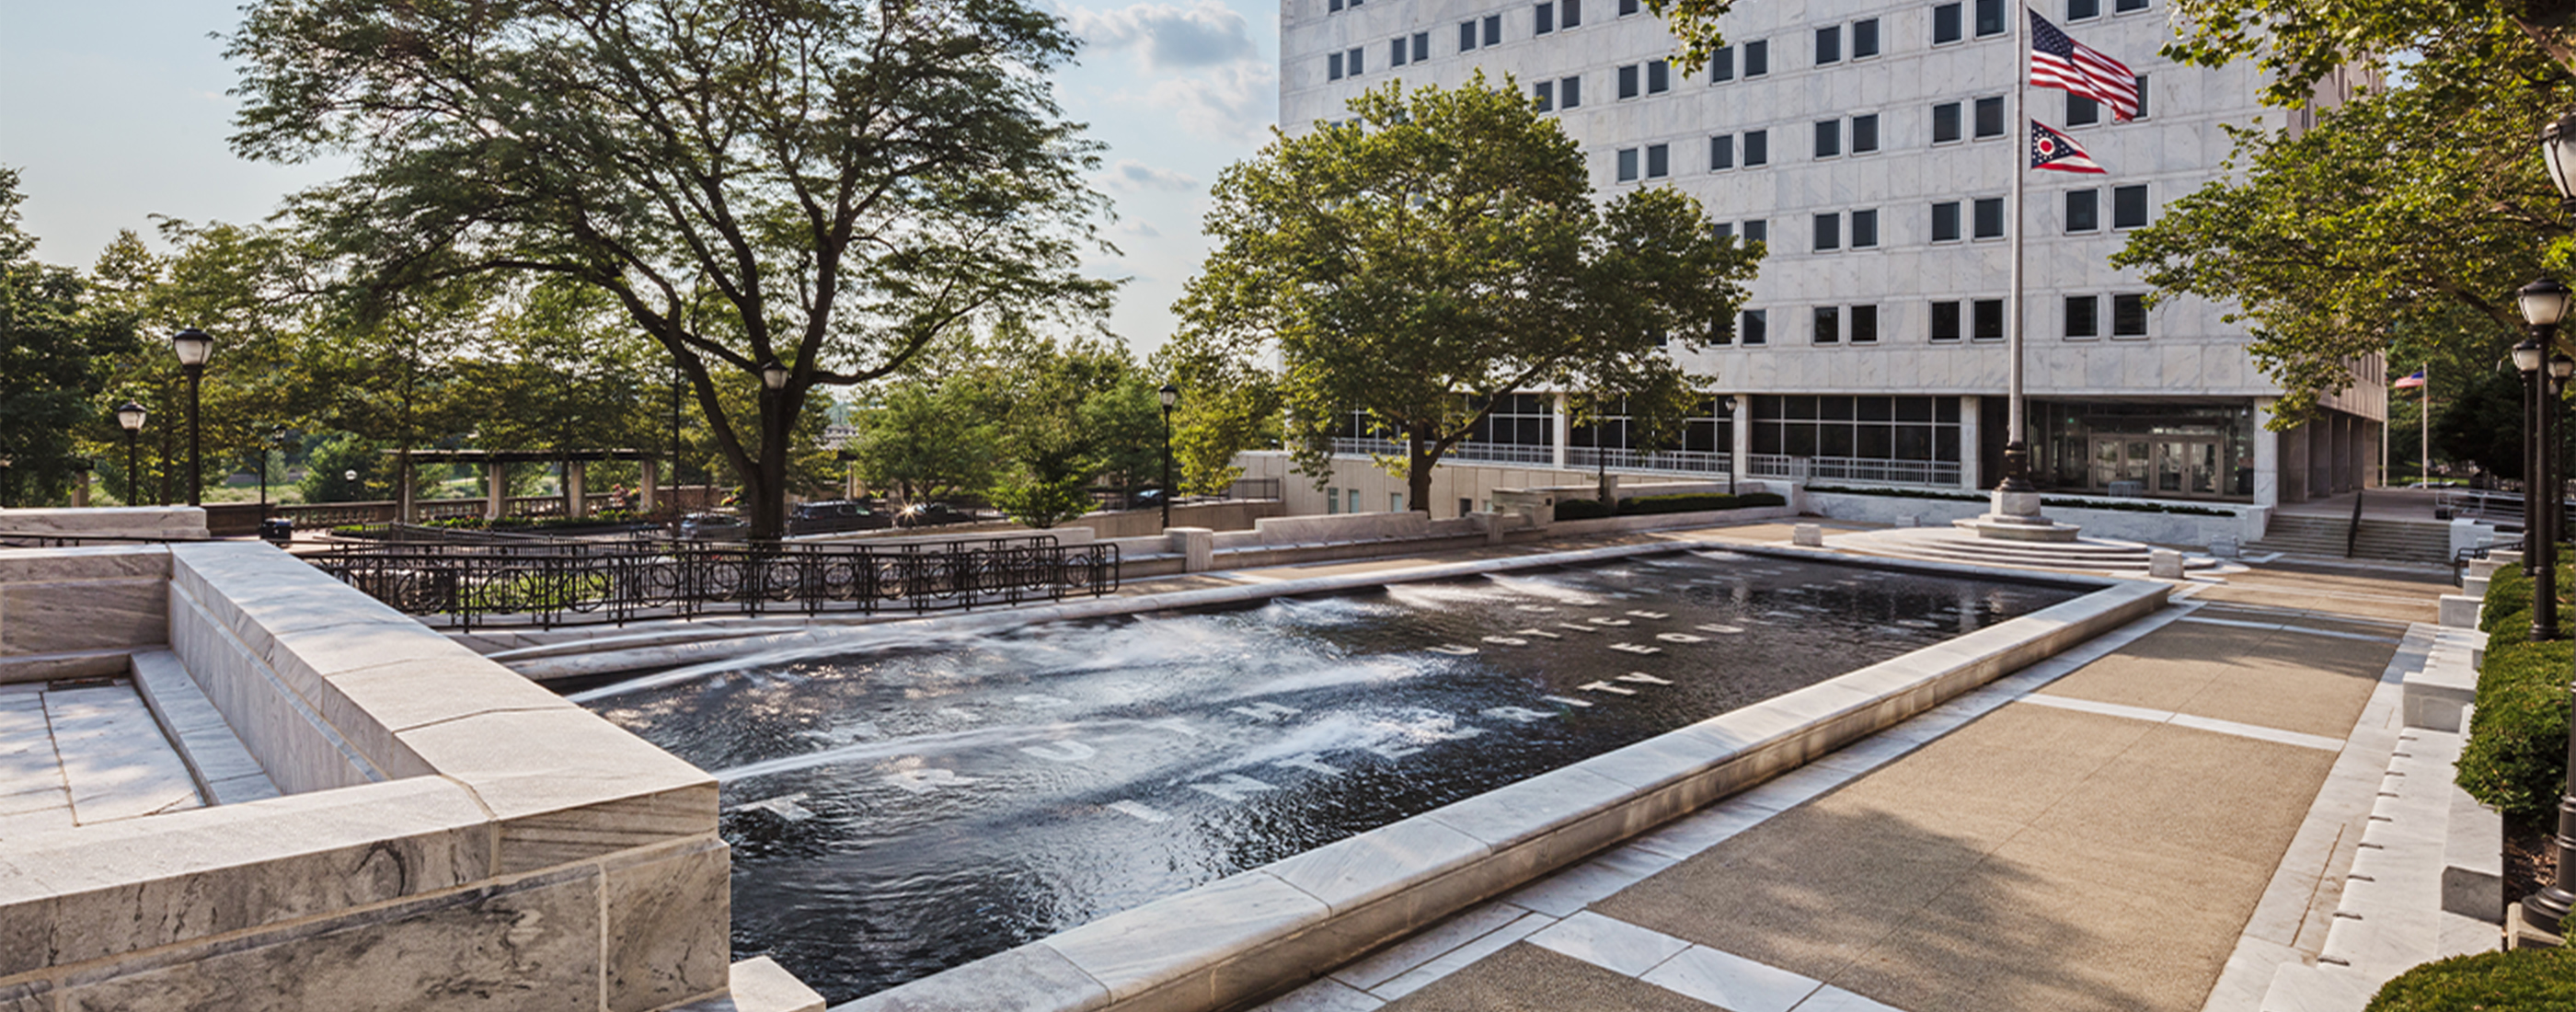 One of two fountain pools located in the plaza outside the Ohio Supreme Court.